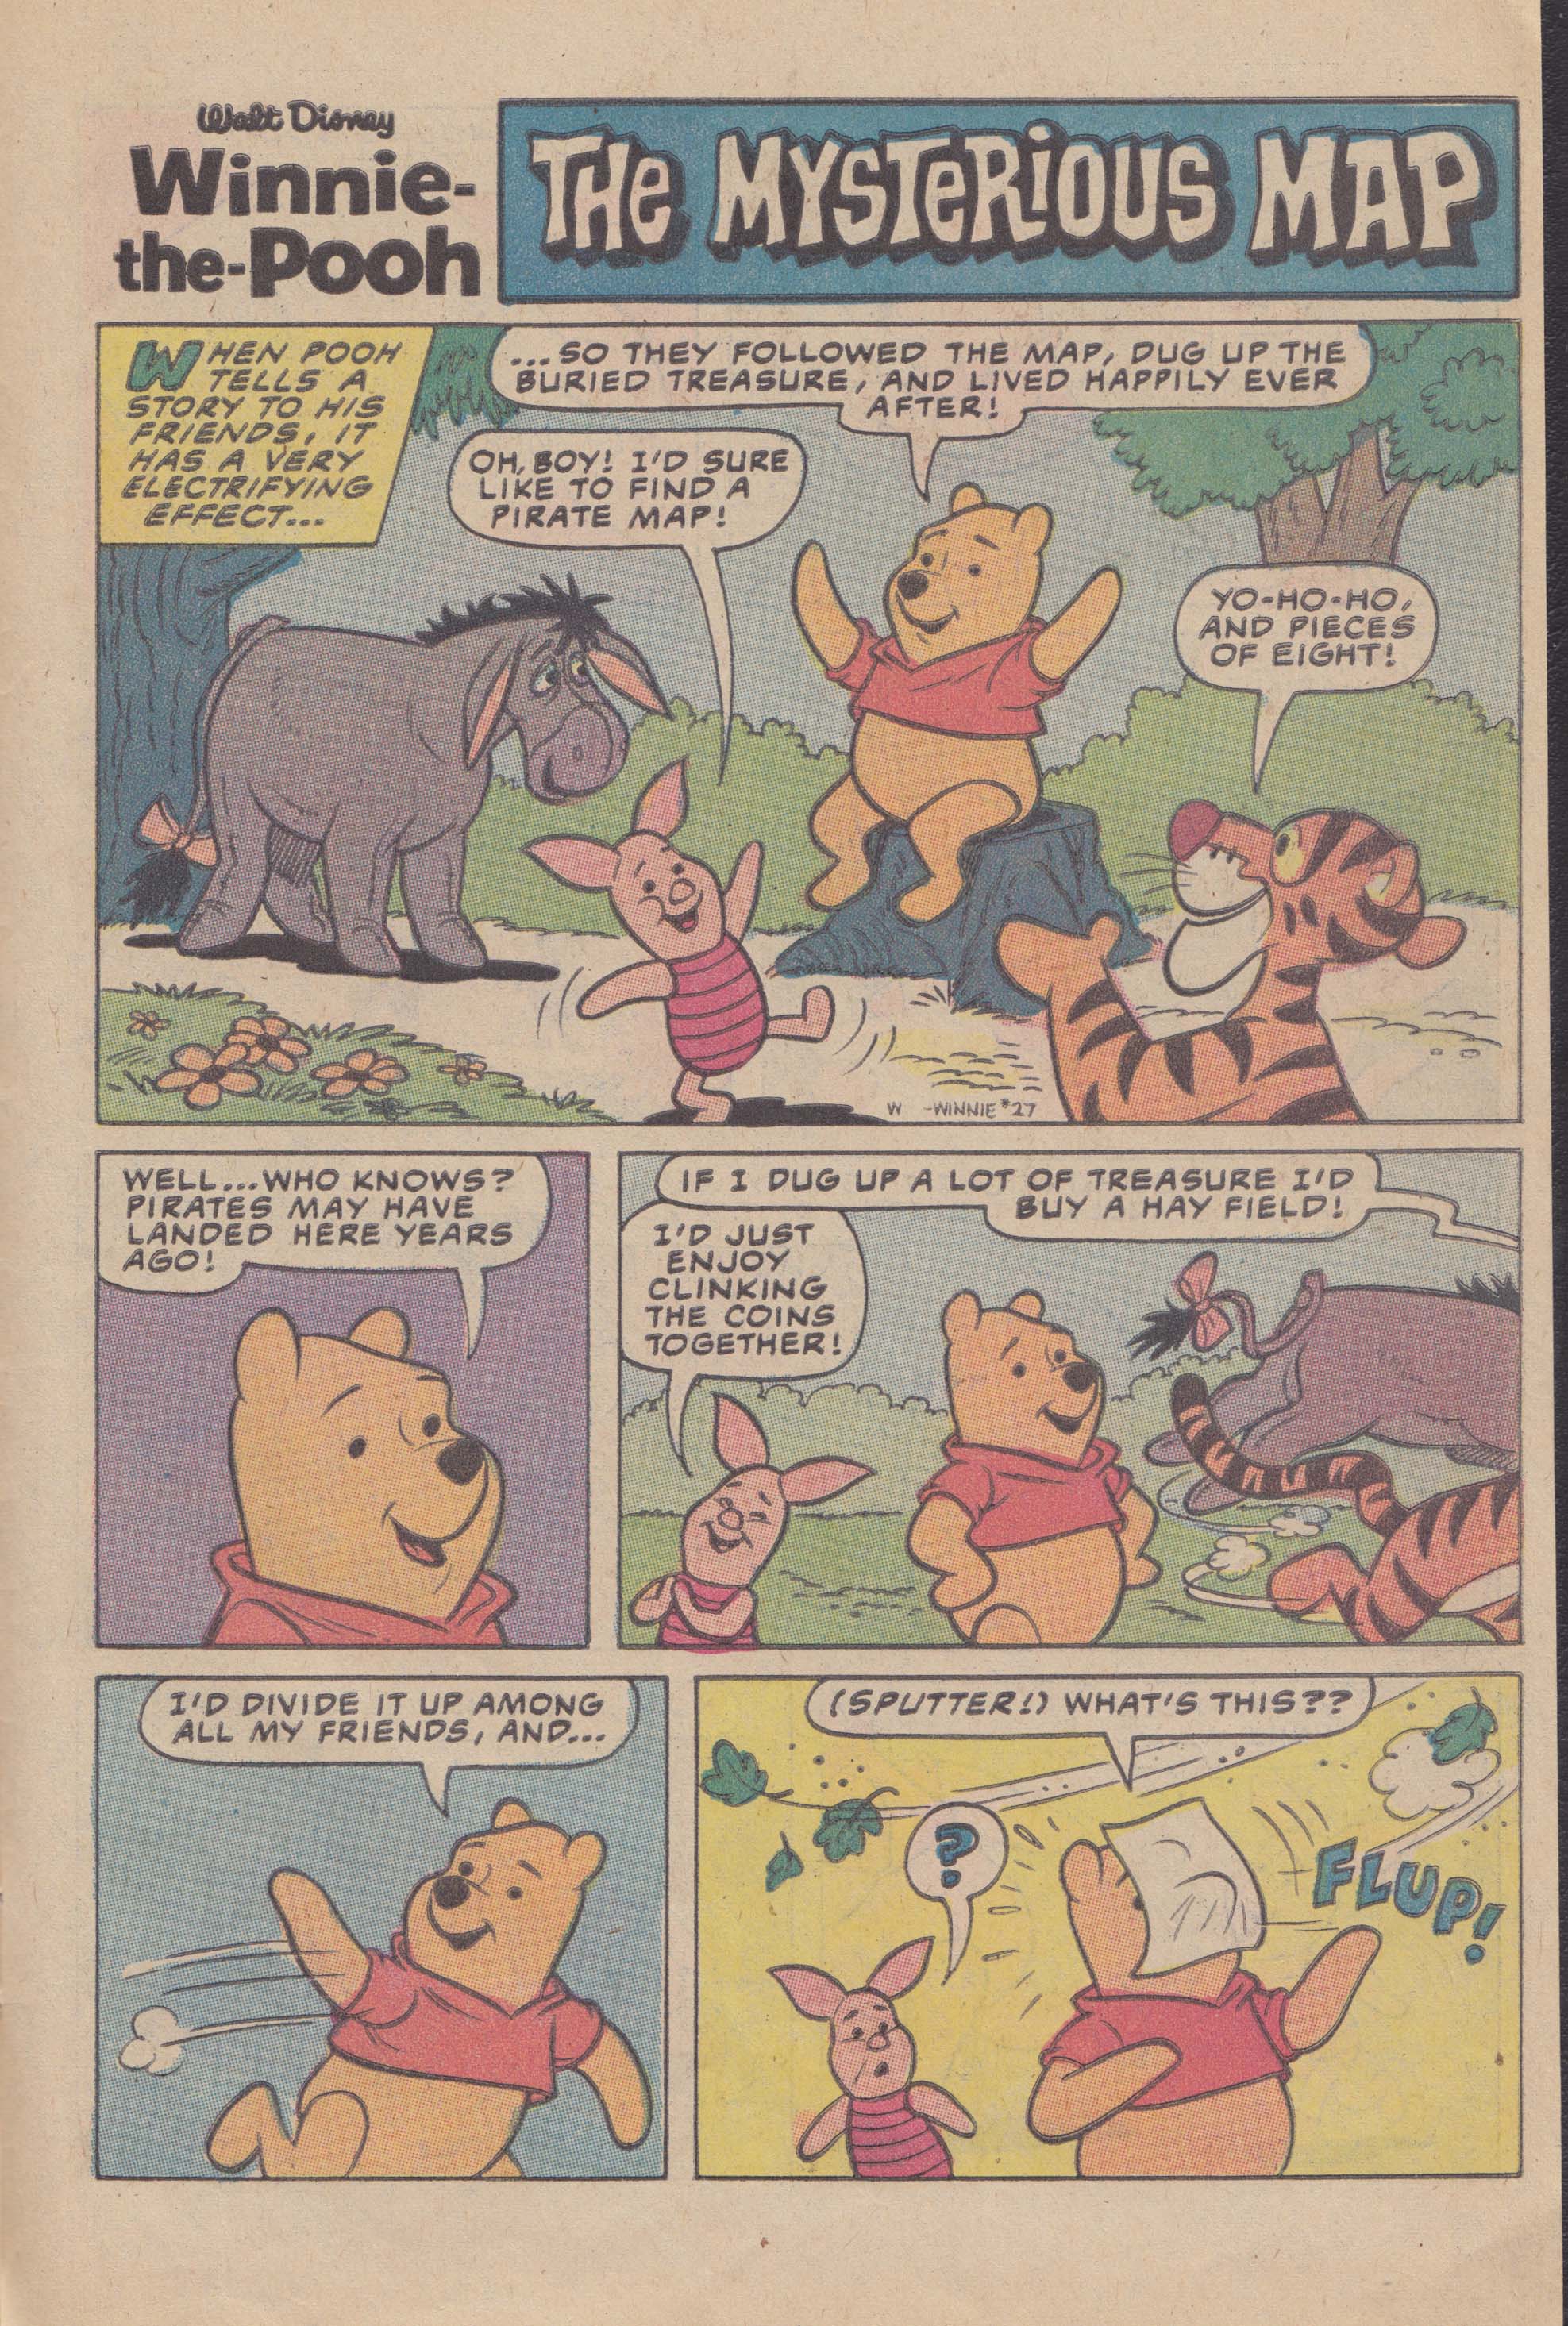 Read online Winnie-the-Pooh comic -  Issue #27 - 27